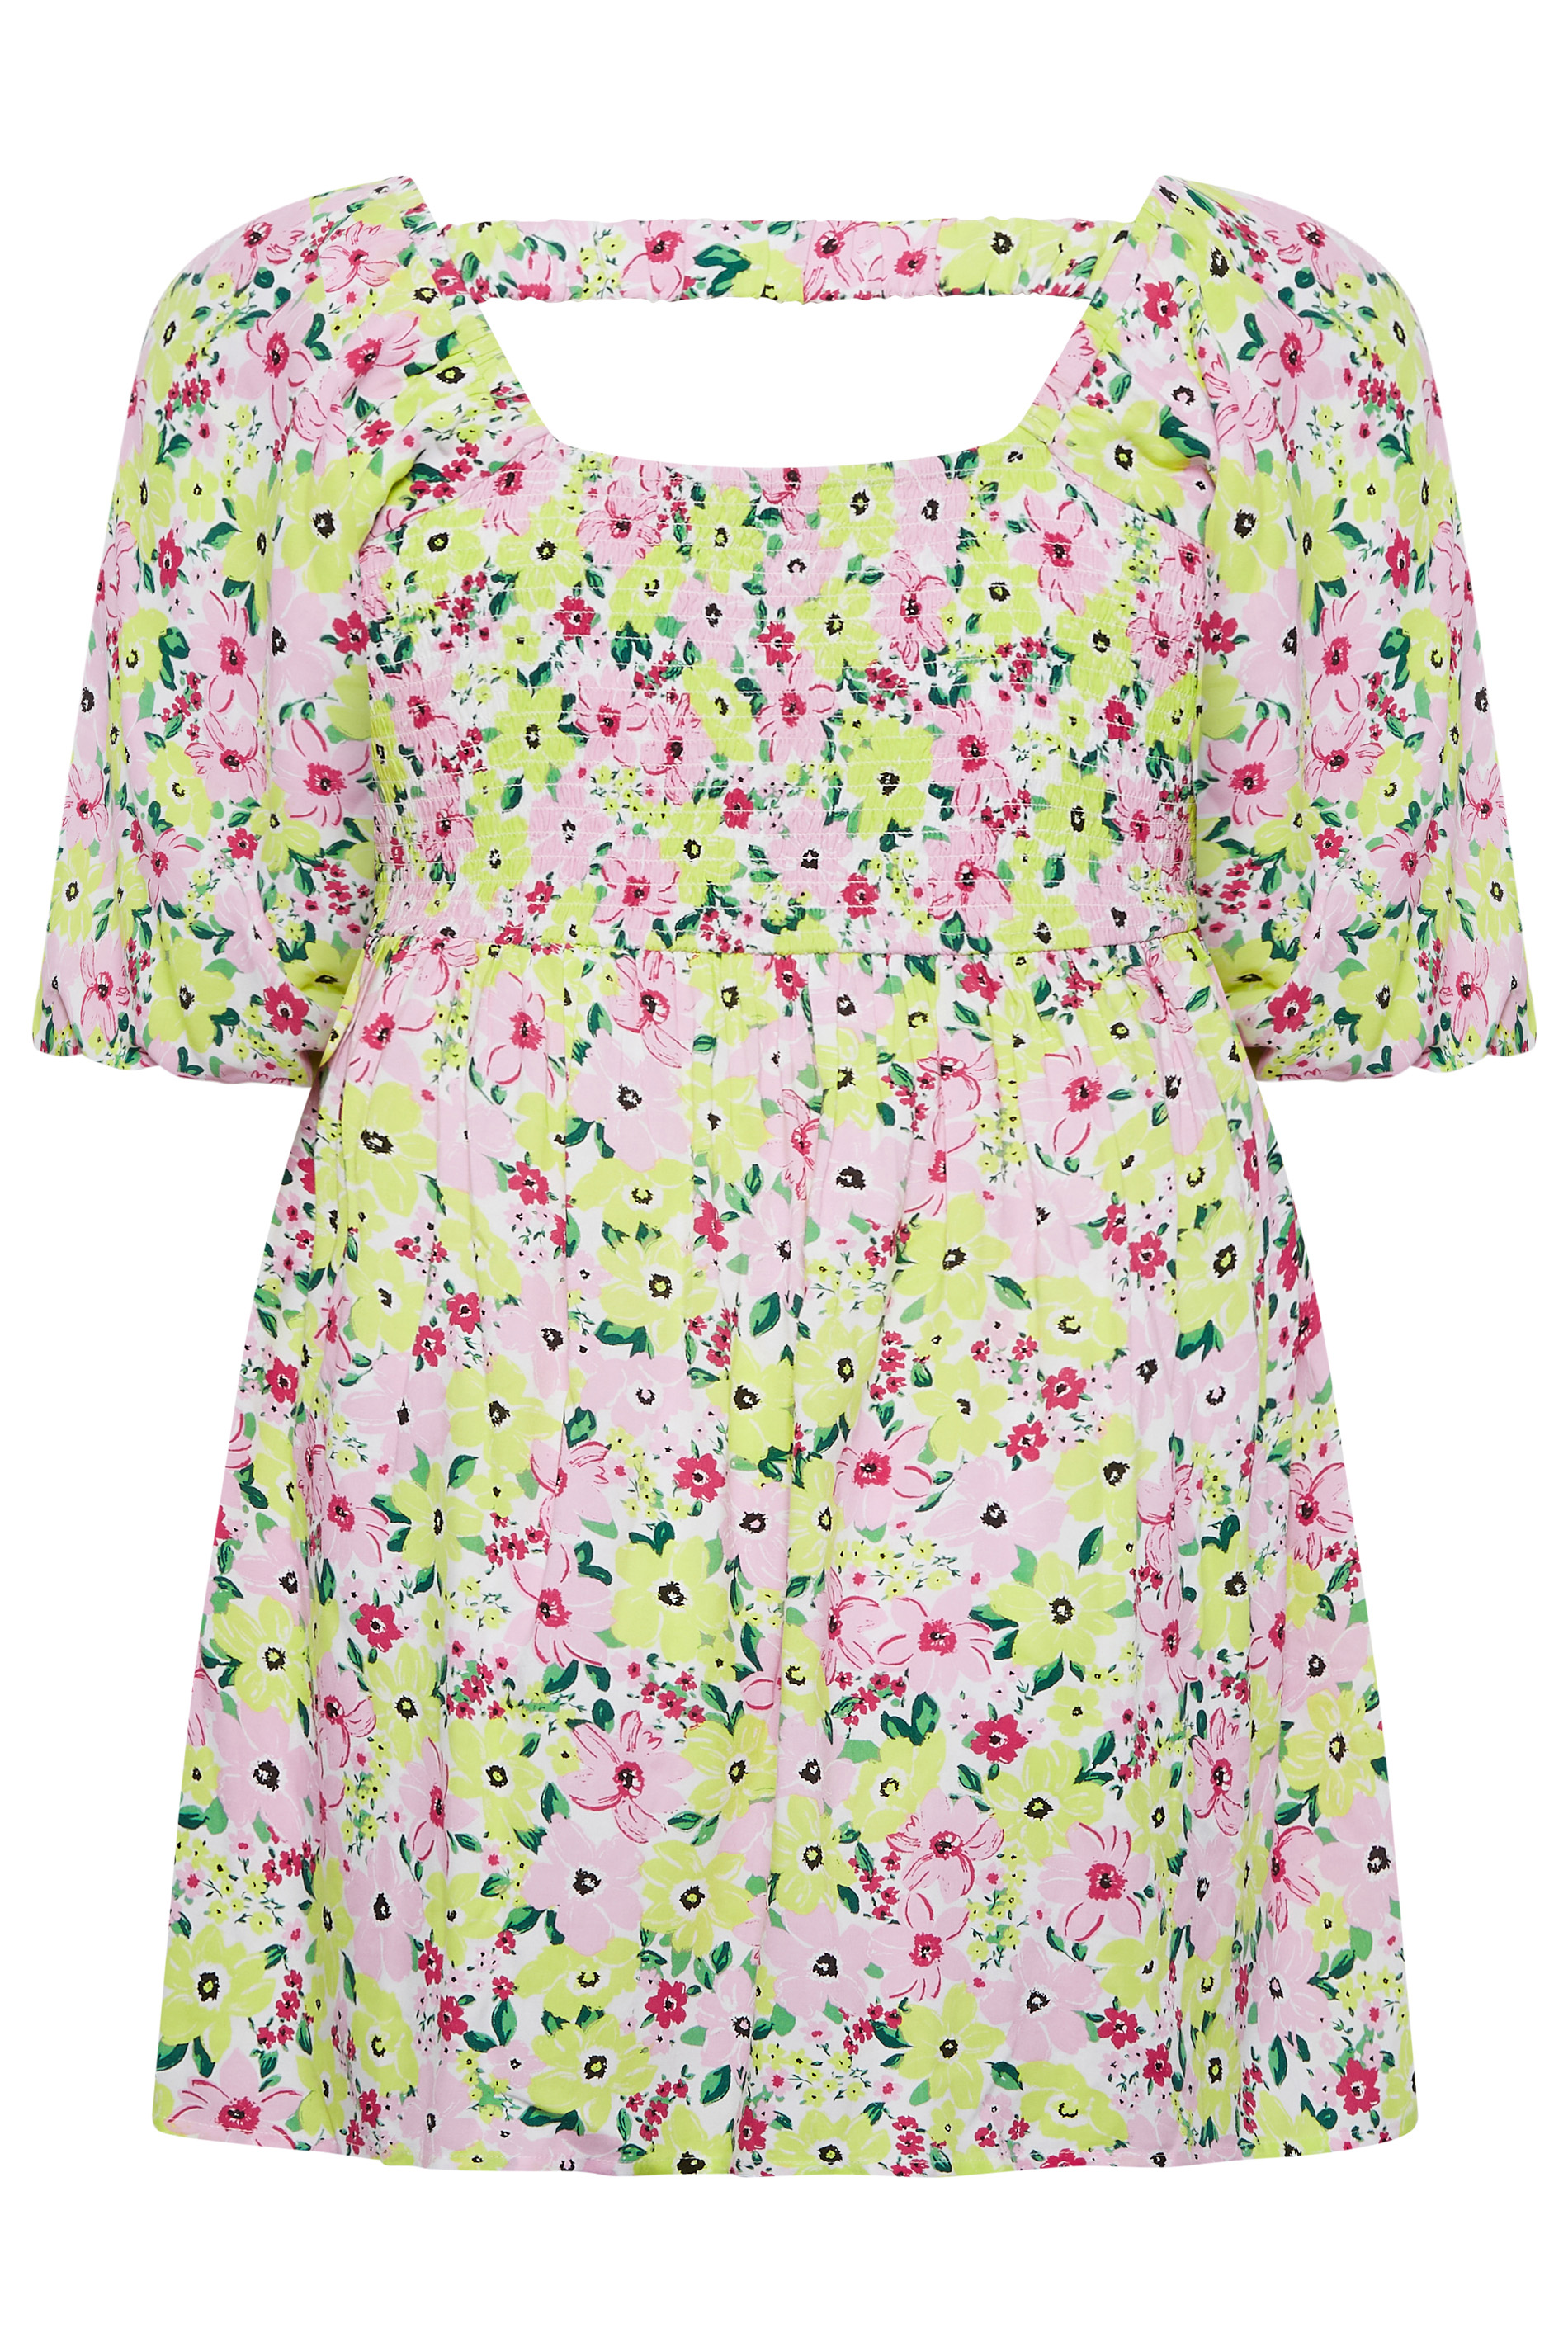 YOURS Curve Plus Size Light Pink Floral Peplum Top | Yours Clothing